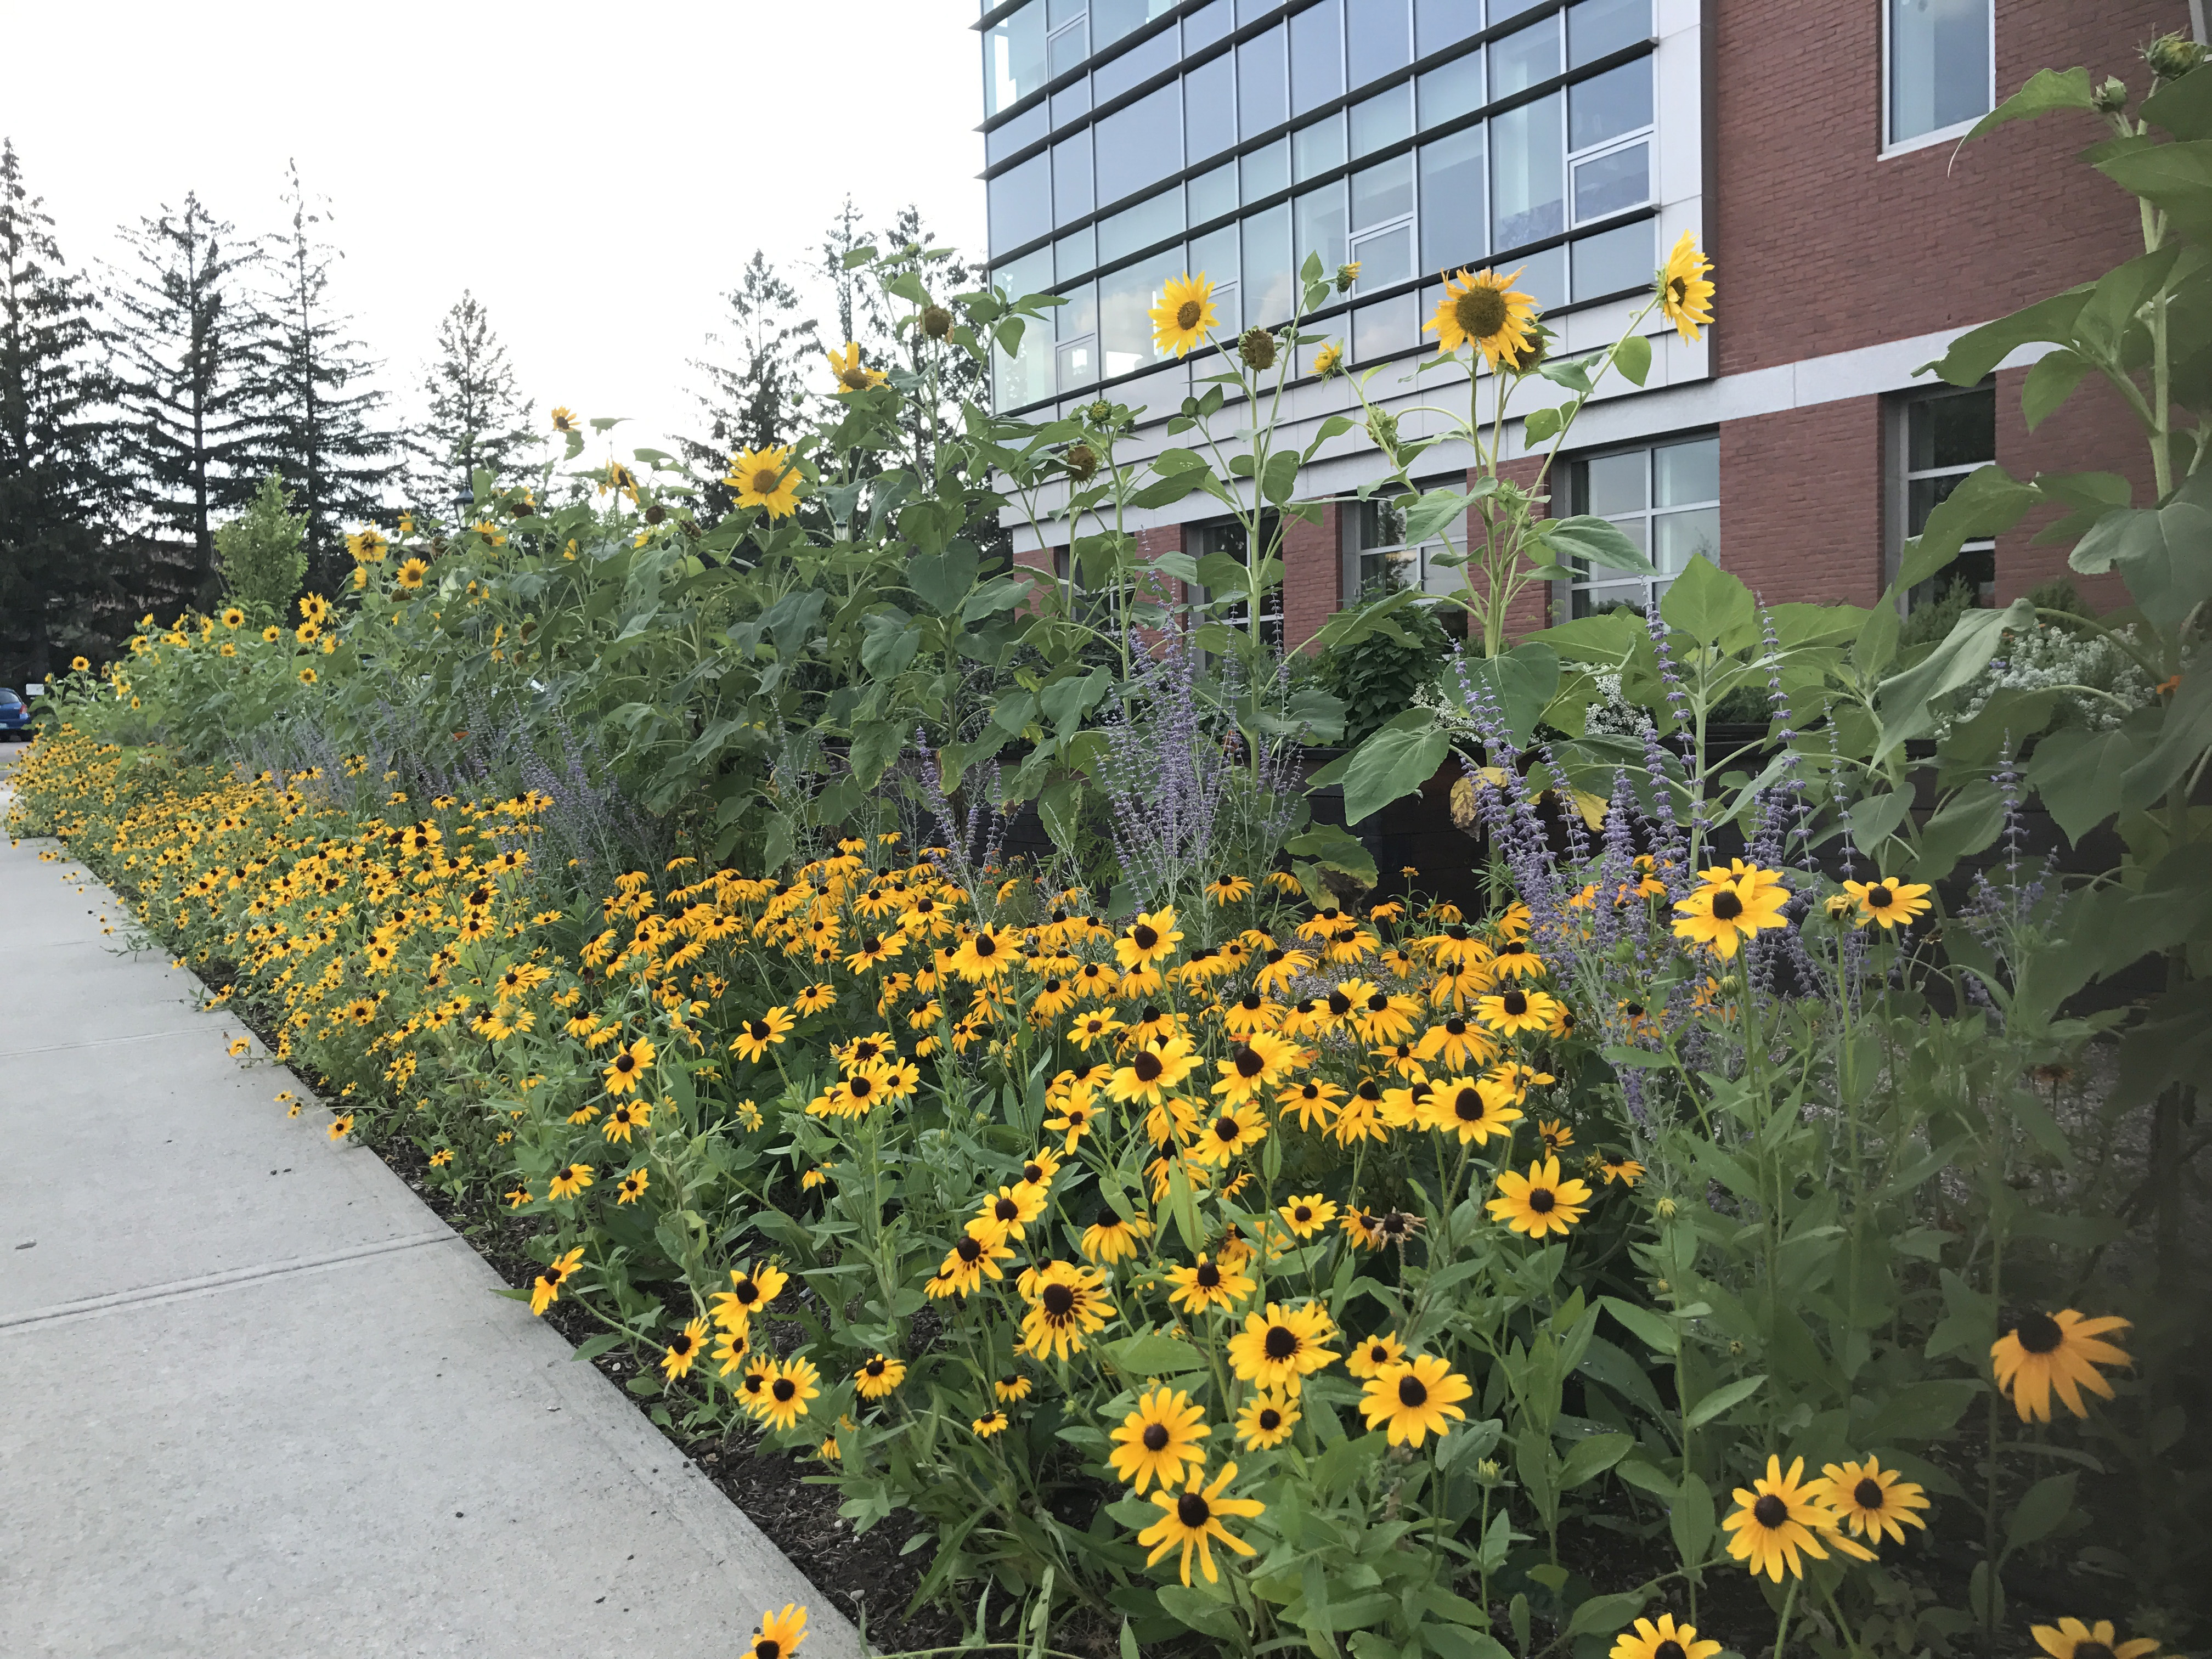 A stand of sunflowers dominates this streetside flower border planted on the campus of University of Vermont.